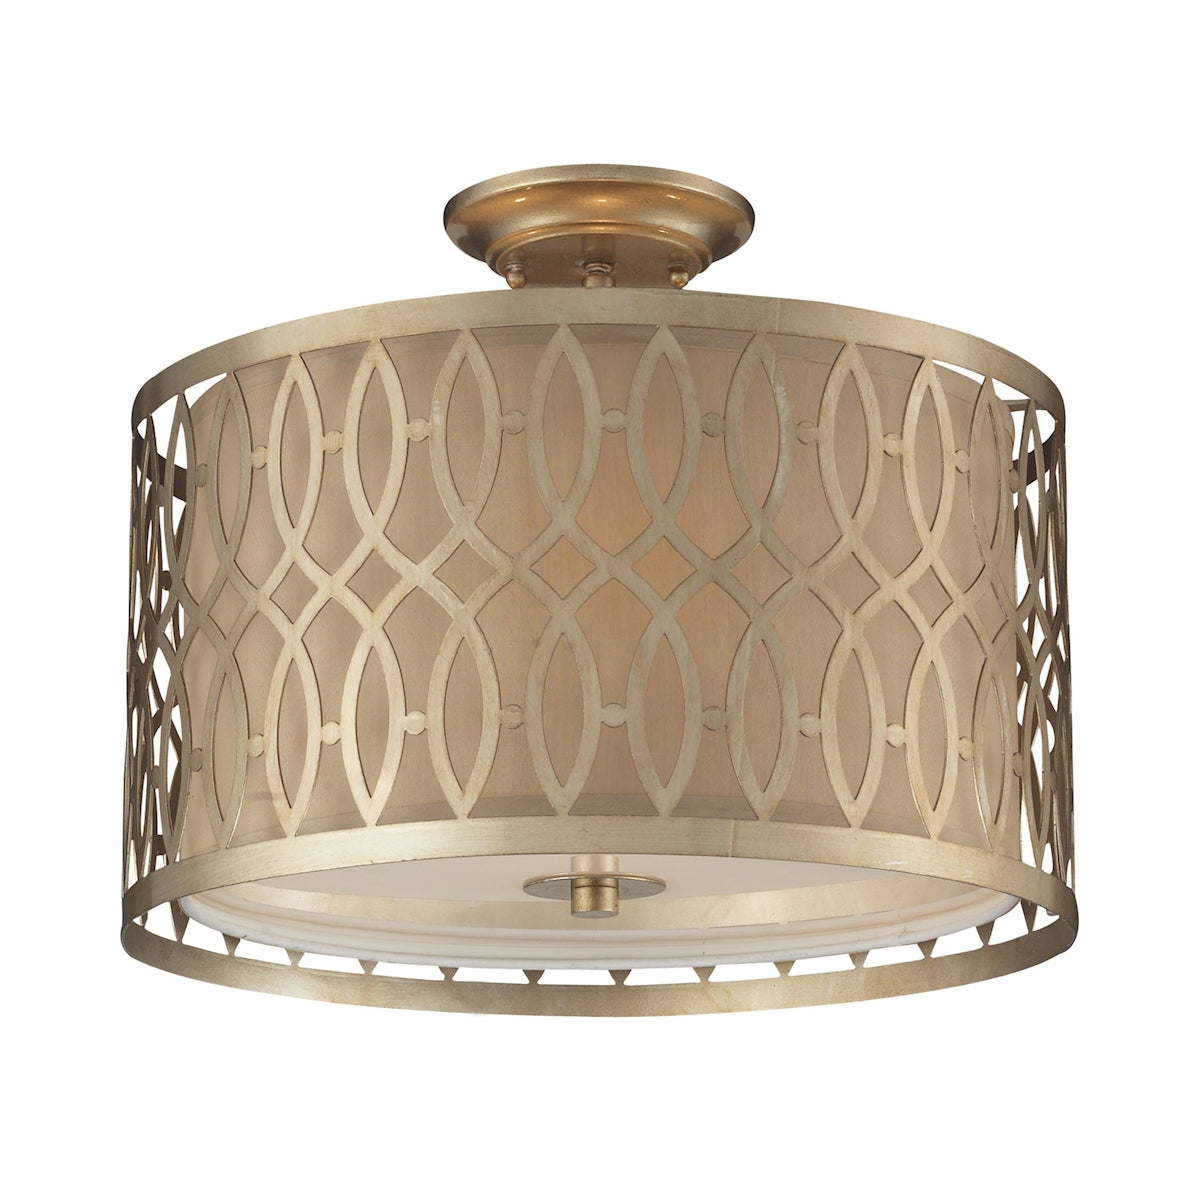 ELK Lighting 31122/3 Estonia 3-Light Semi Flush in Aged Silver with Metal and Beige Fabric Shade